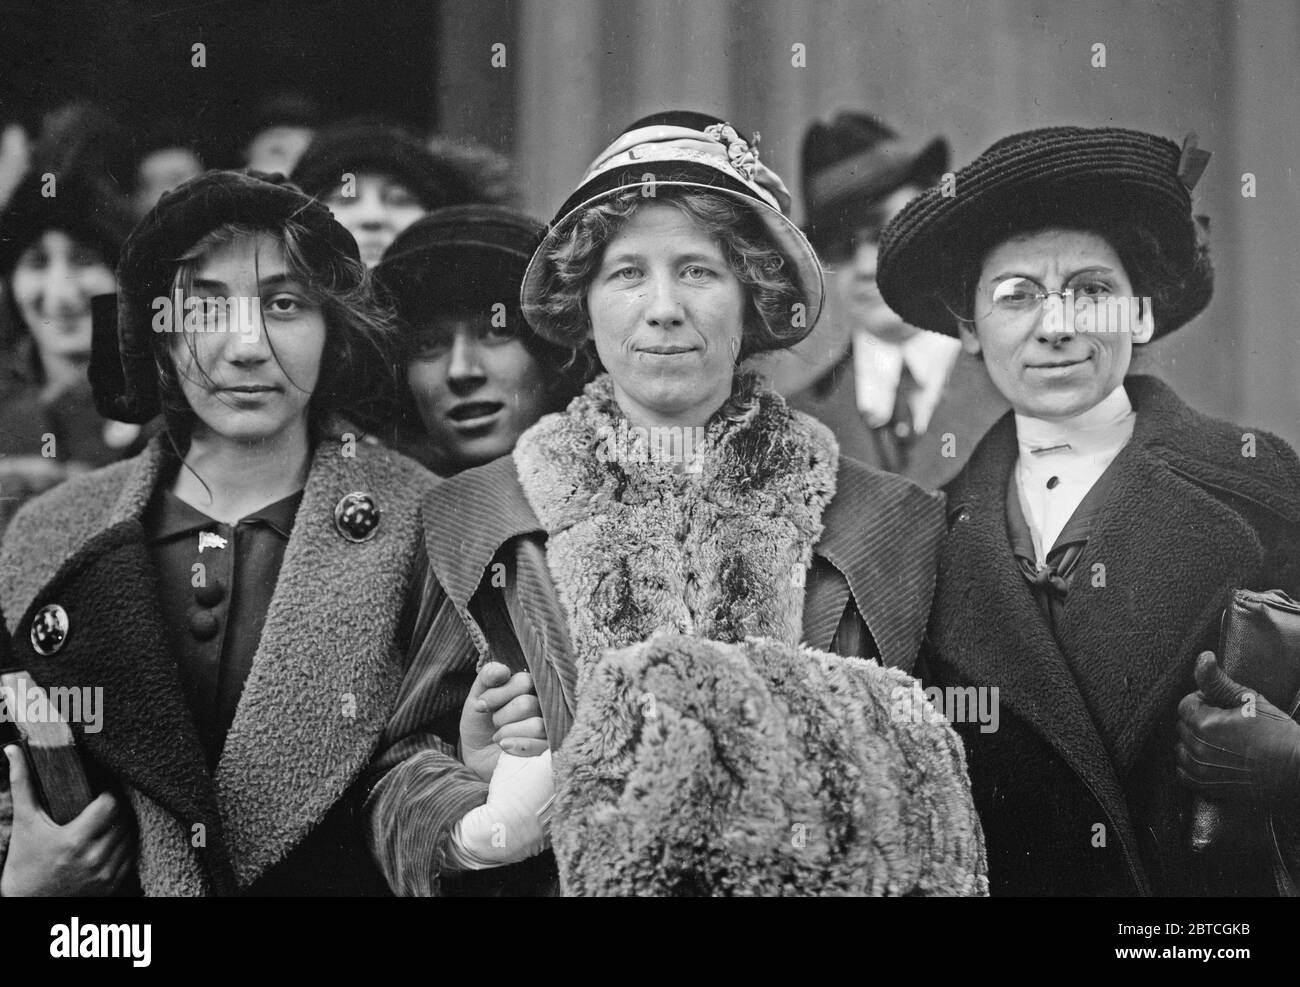 Suffrage and labor activist Flora Dodge 'Fola' La Follette (1882-1970), social reformer and missionary Rose Livingston and a young striker during a garment strike in New York City in 1913 Stock Photo